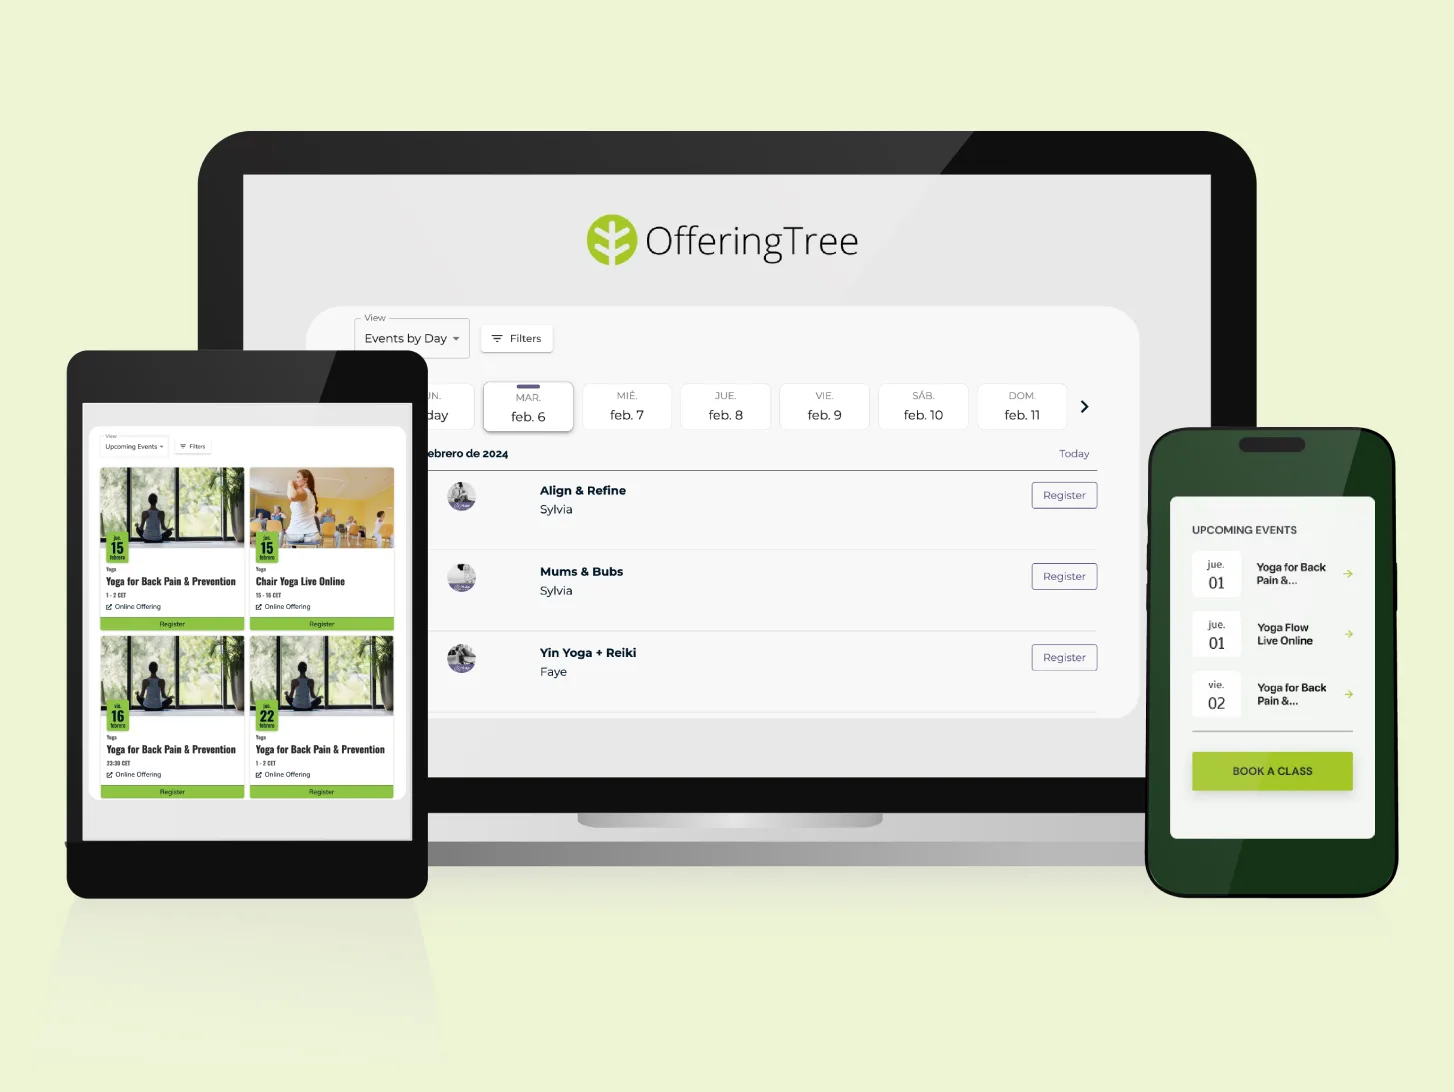 Picture of offeringtree website shown on laptop and mobile phone